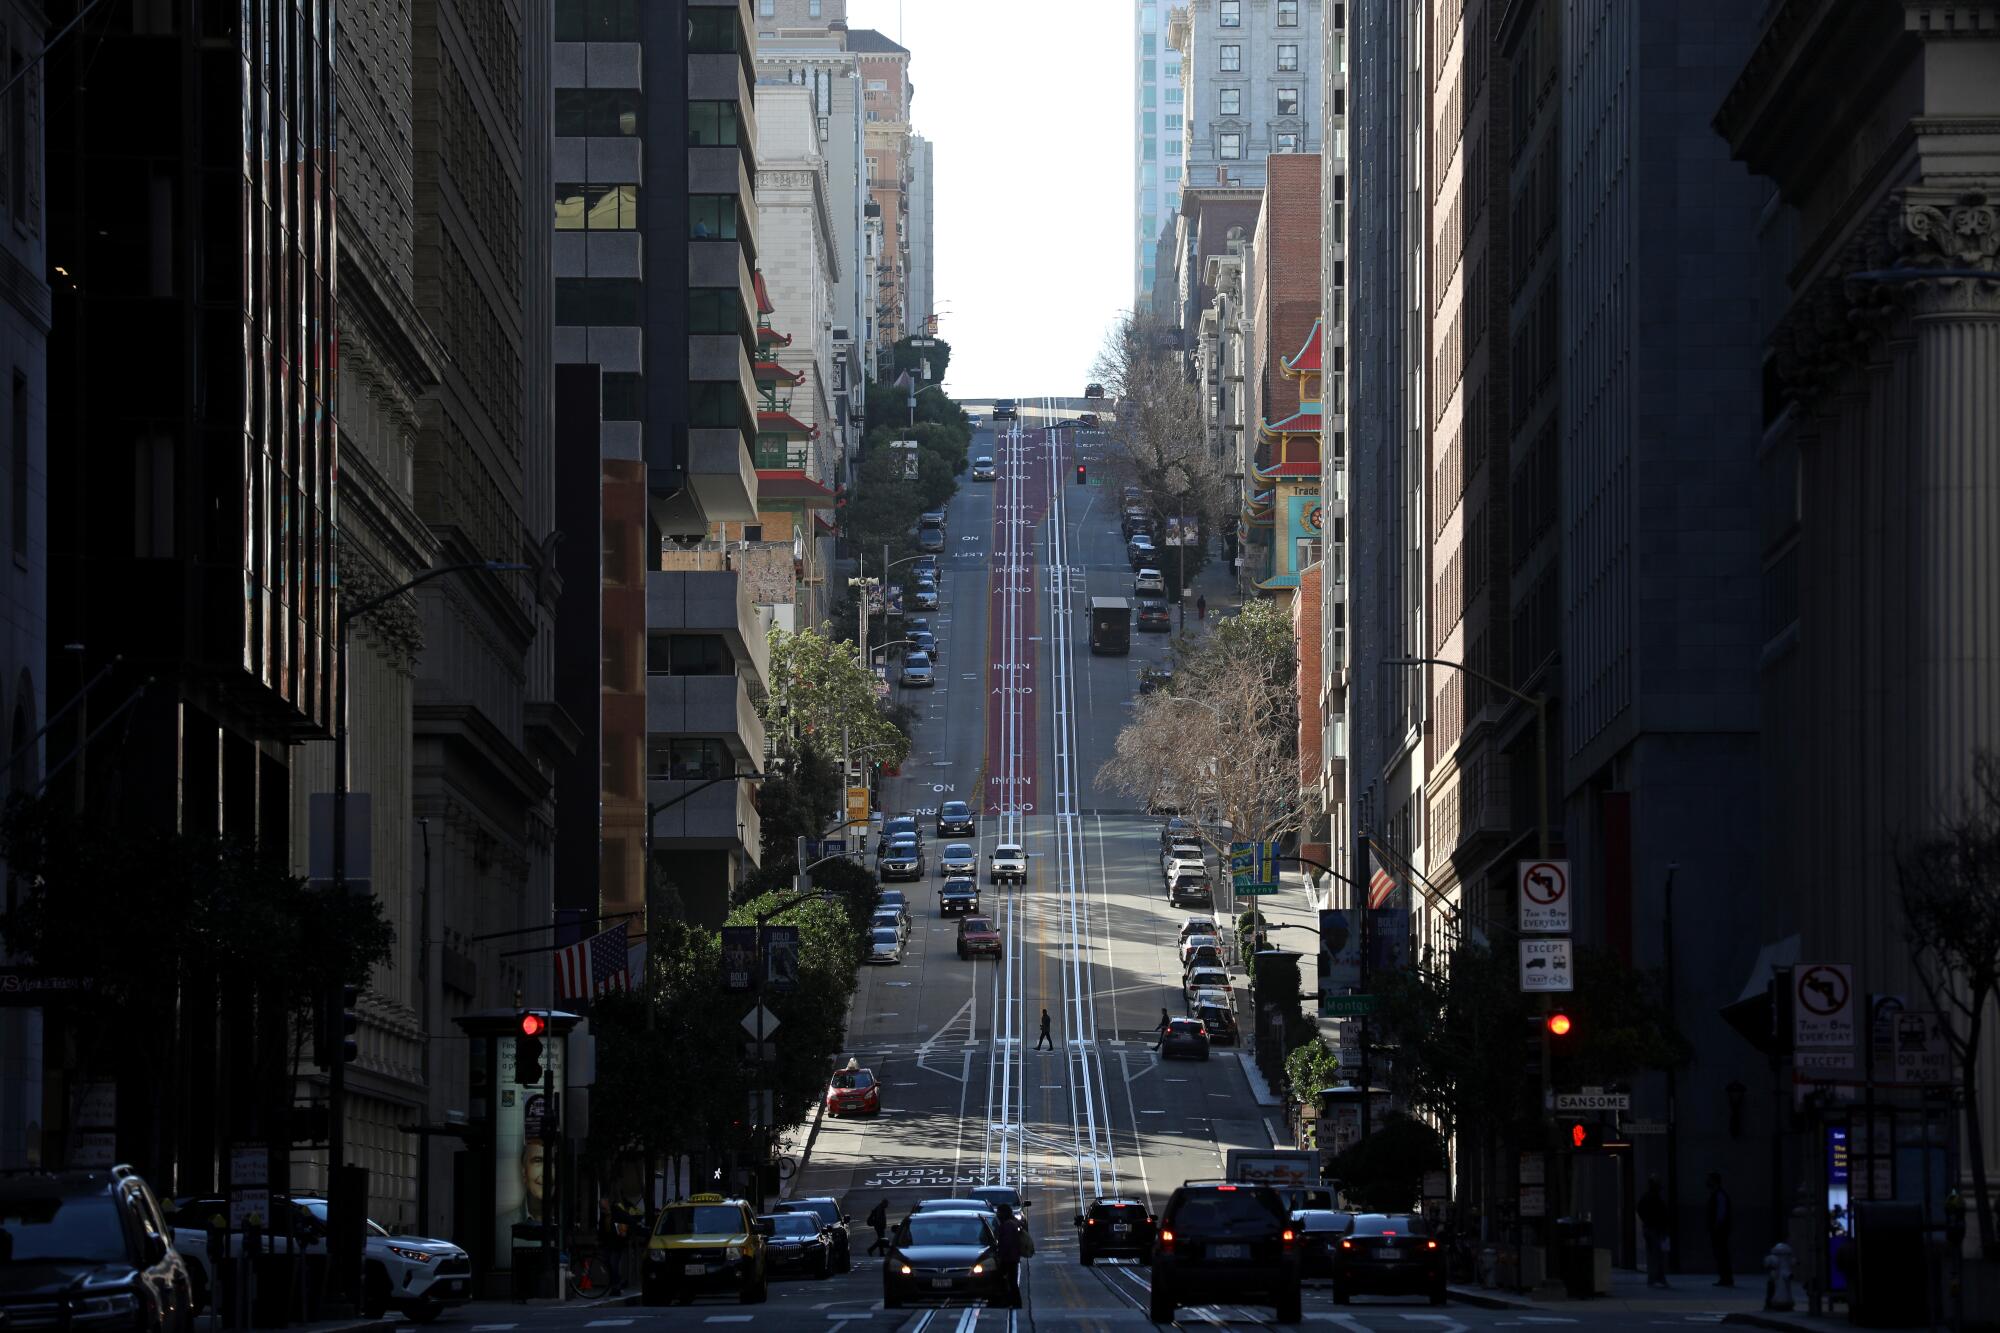 California Street in downtown San Francisco with buildings and cars but no cable cars on its tracks.